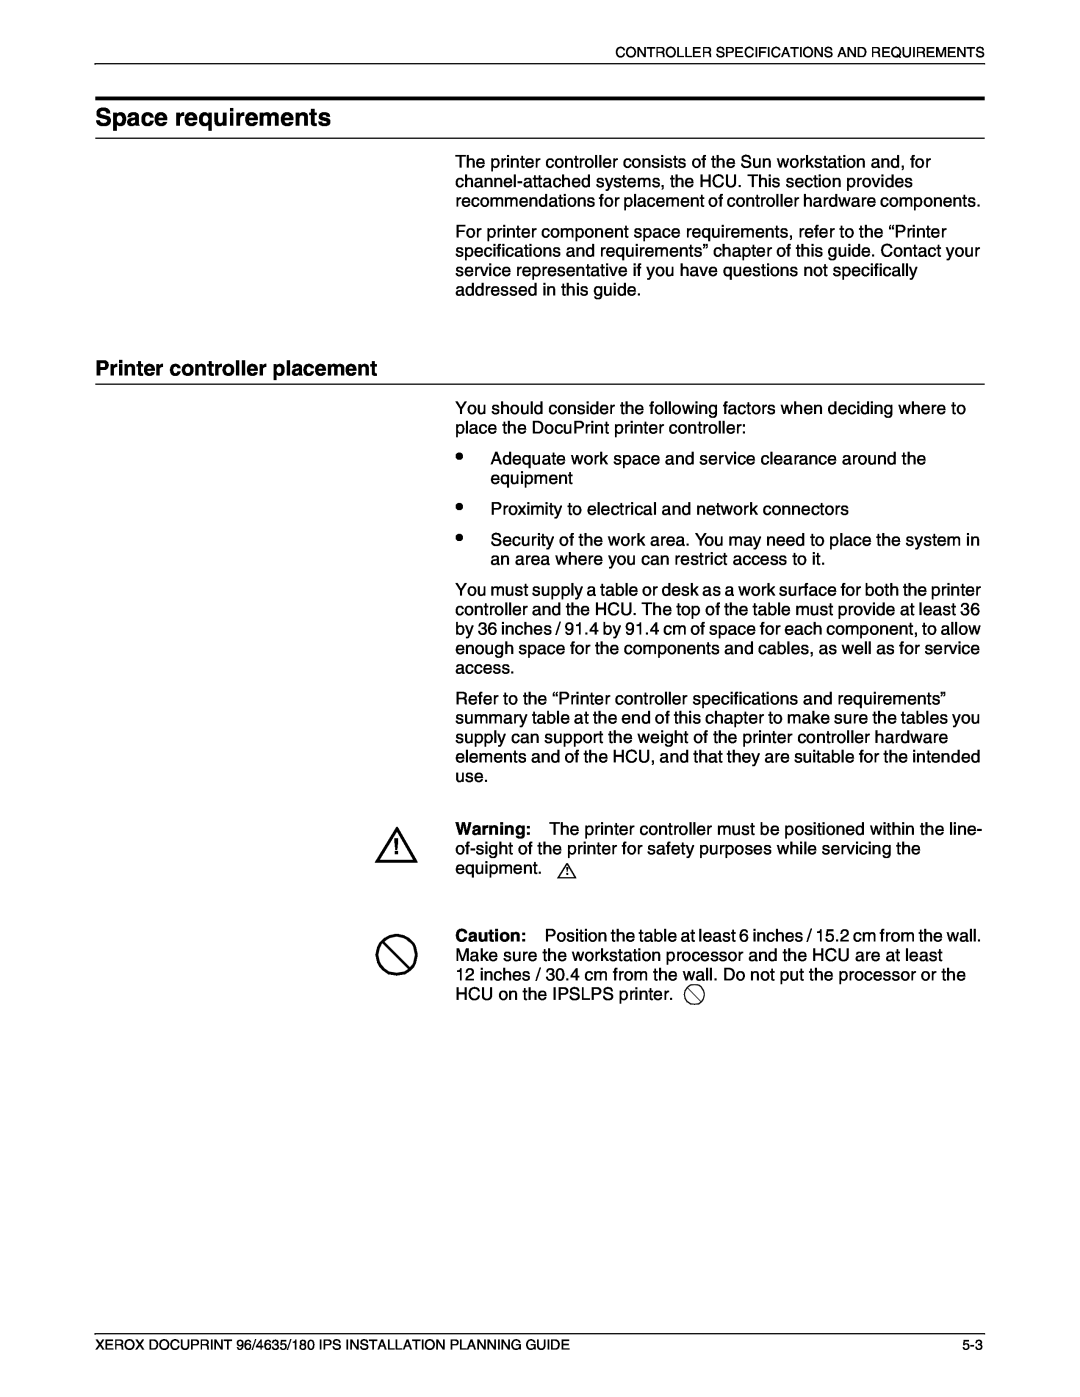 Xerox 180 IPS manual Space requirements, Printer controller placement 